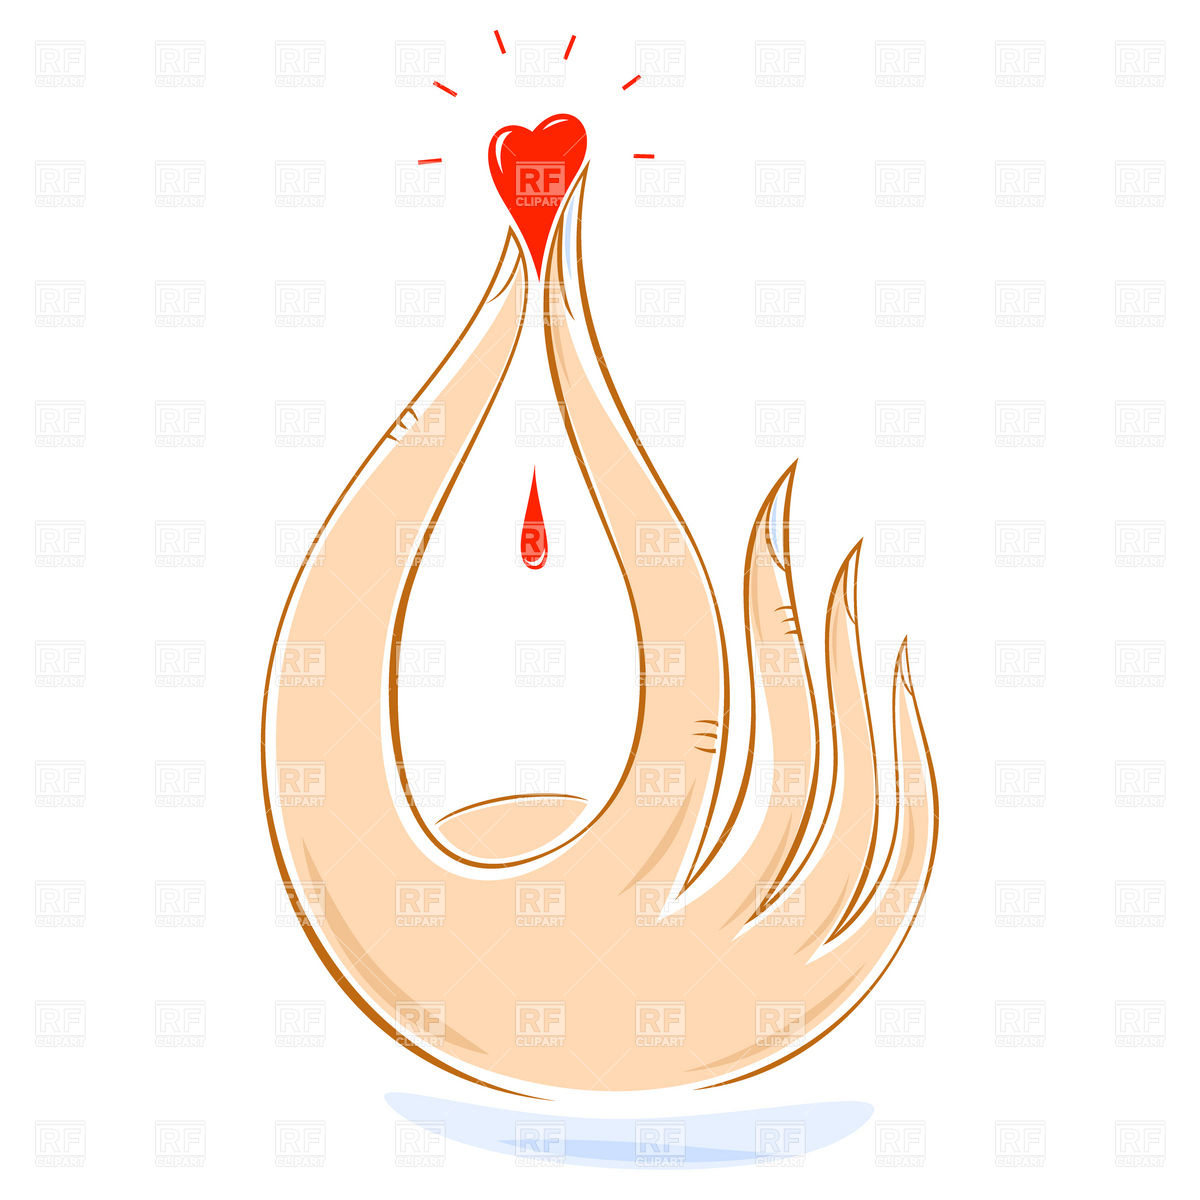 Heart   Charity Symbol Download Royalty Free Vector Clipart  Eps